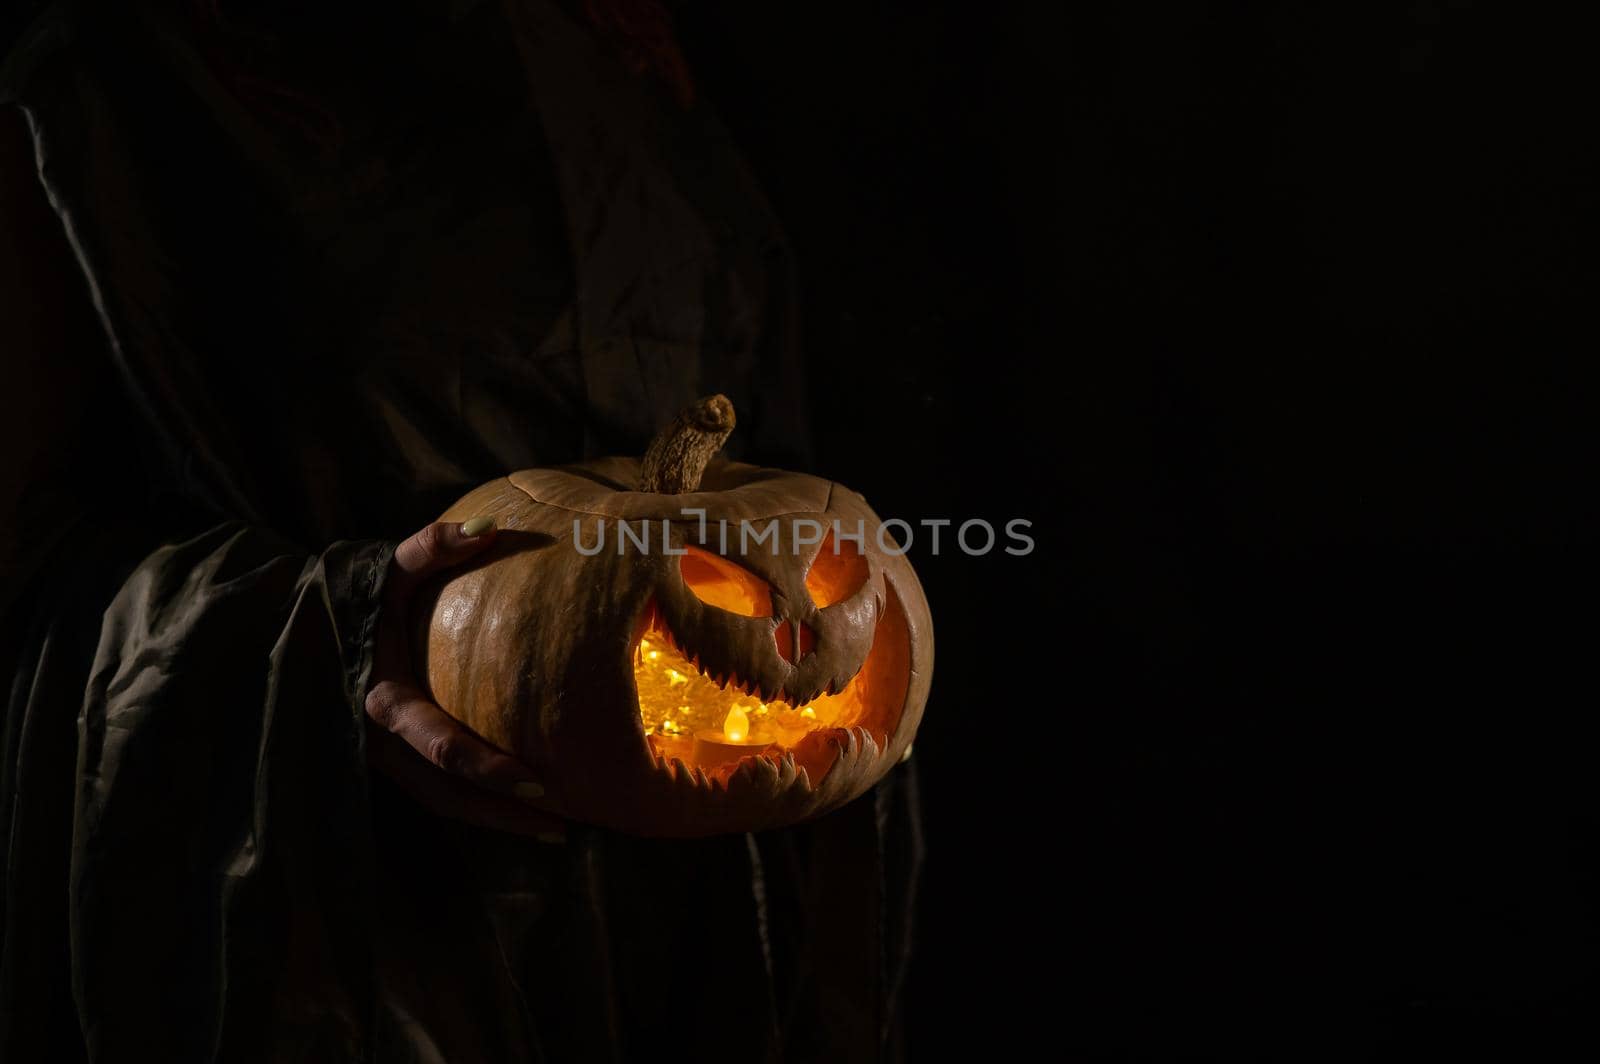 The witch is holding a pumpkin jack o lantern glowing in the dark. Halloween